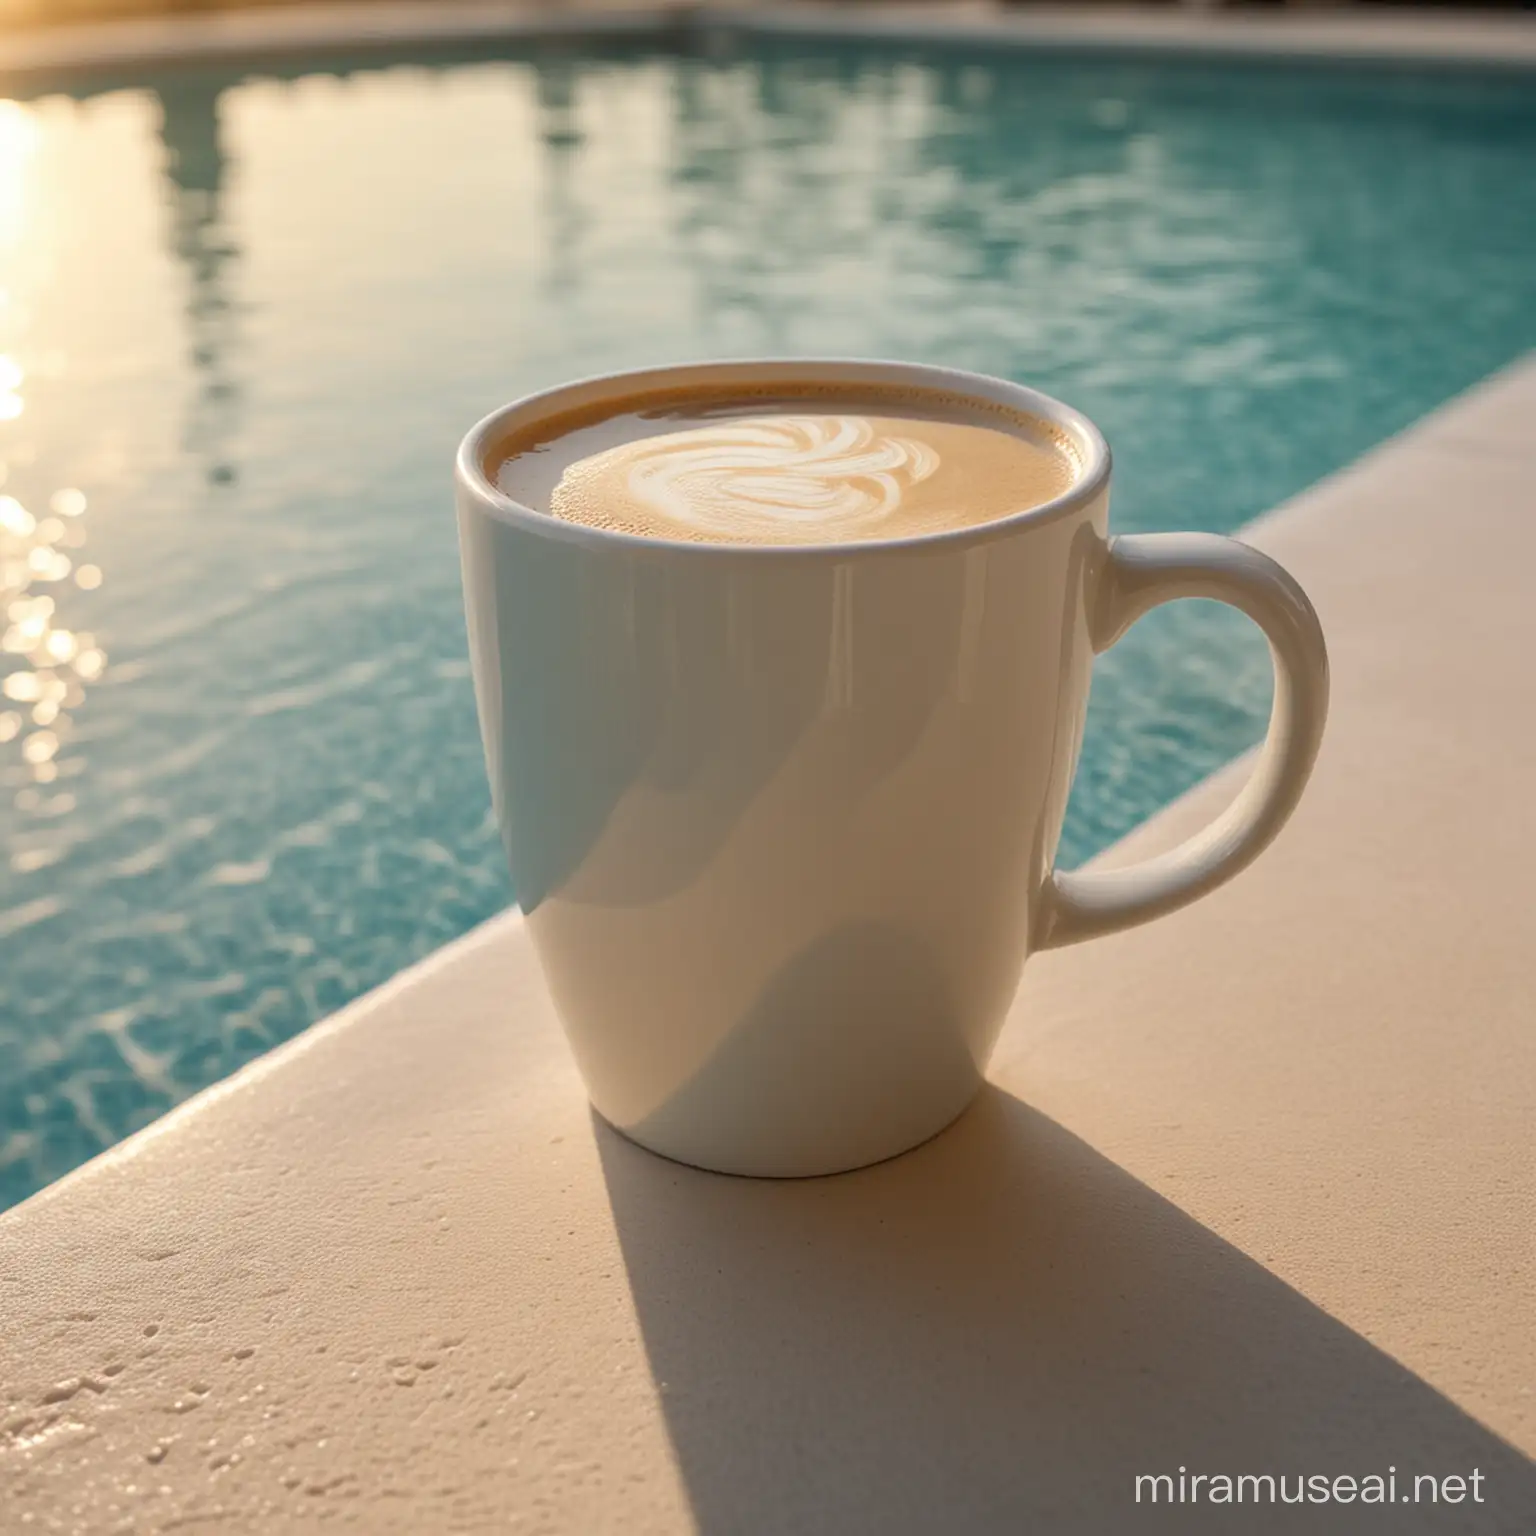 A close-up of a white coffee cup placed on the edge of the pool. The pool is slightly blurred. A sunrise is visible in the background. The photo is 4k, taken with a high end camera.